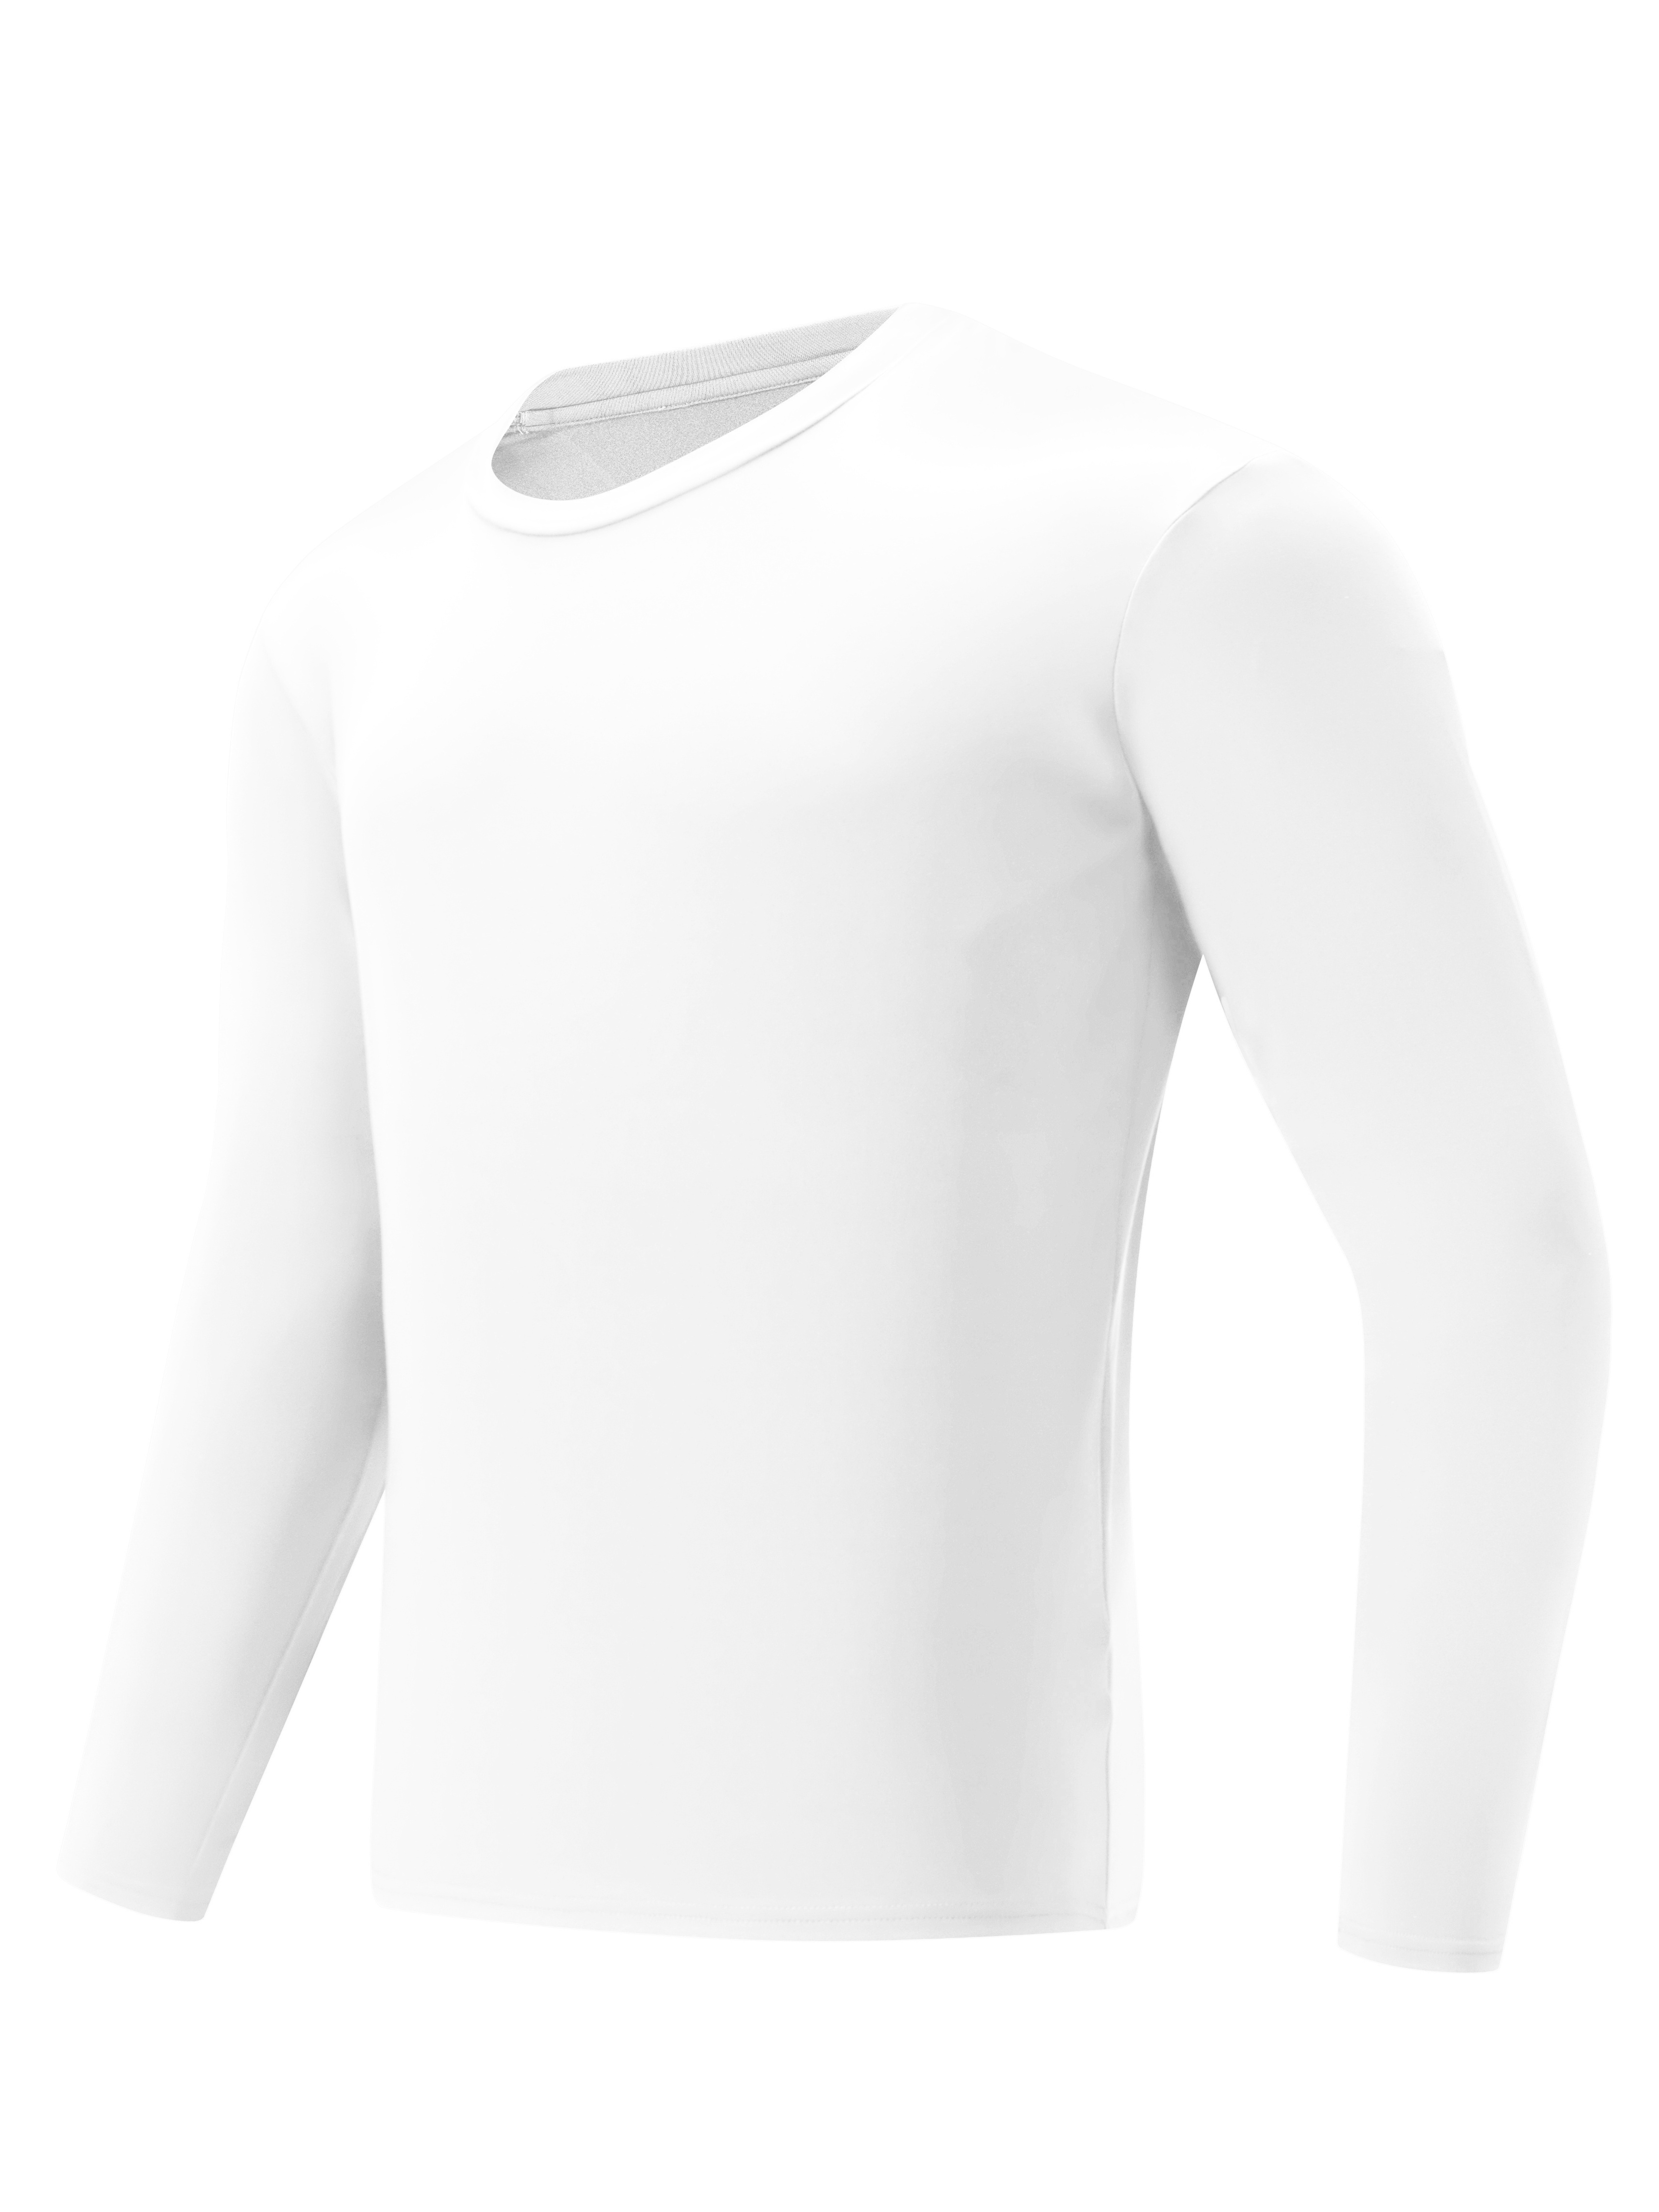 Stay Warm This Winter: Men's Fleece-Lined T-Shirt Thermal Underwear Top